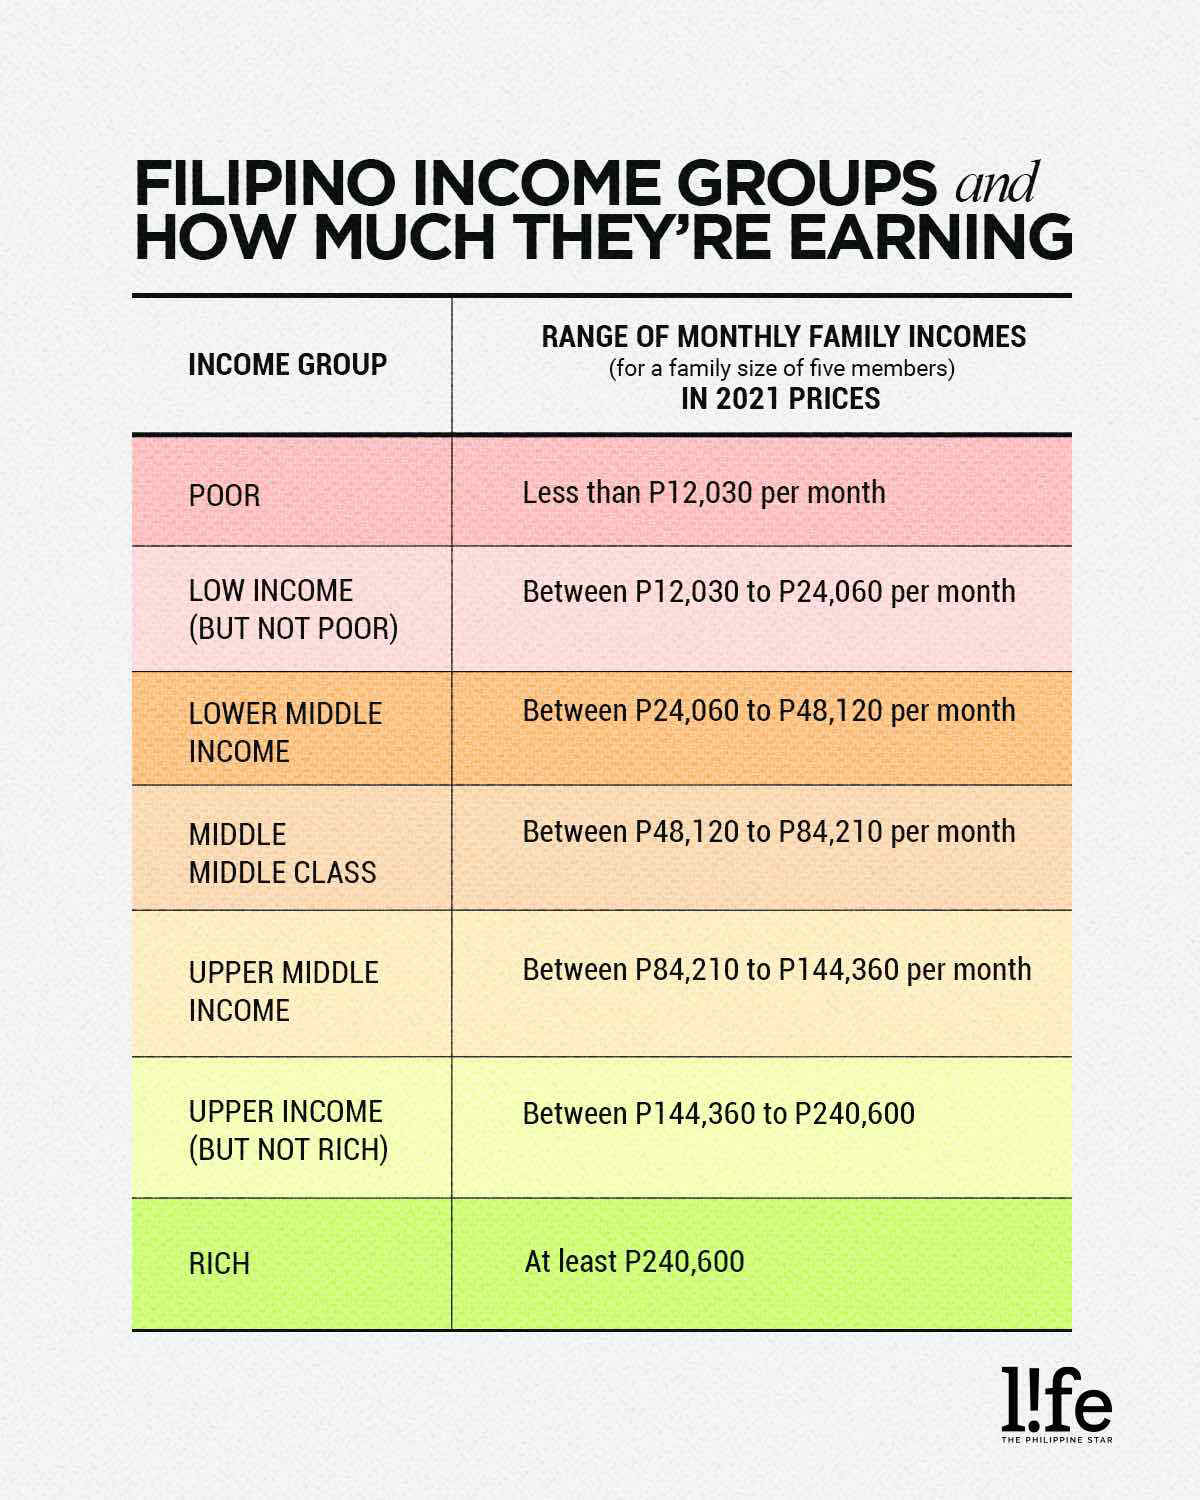 Are you poor, middle class, or rich? Here's how much Filipino